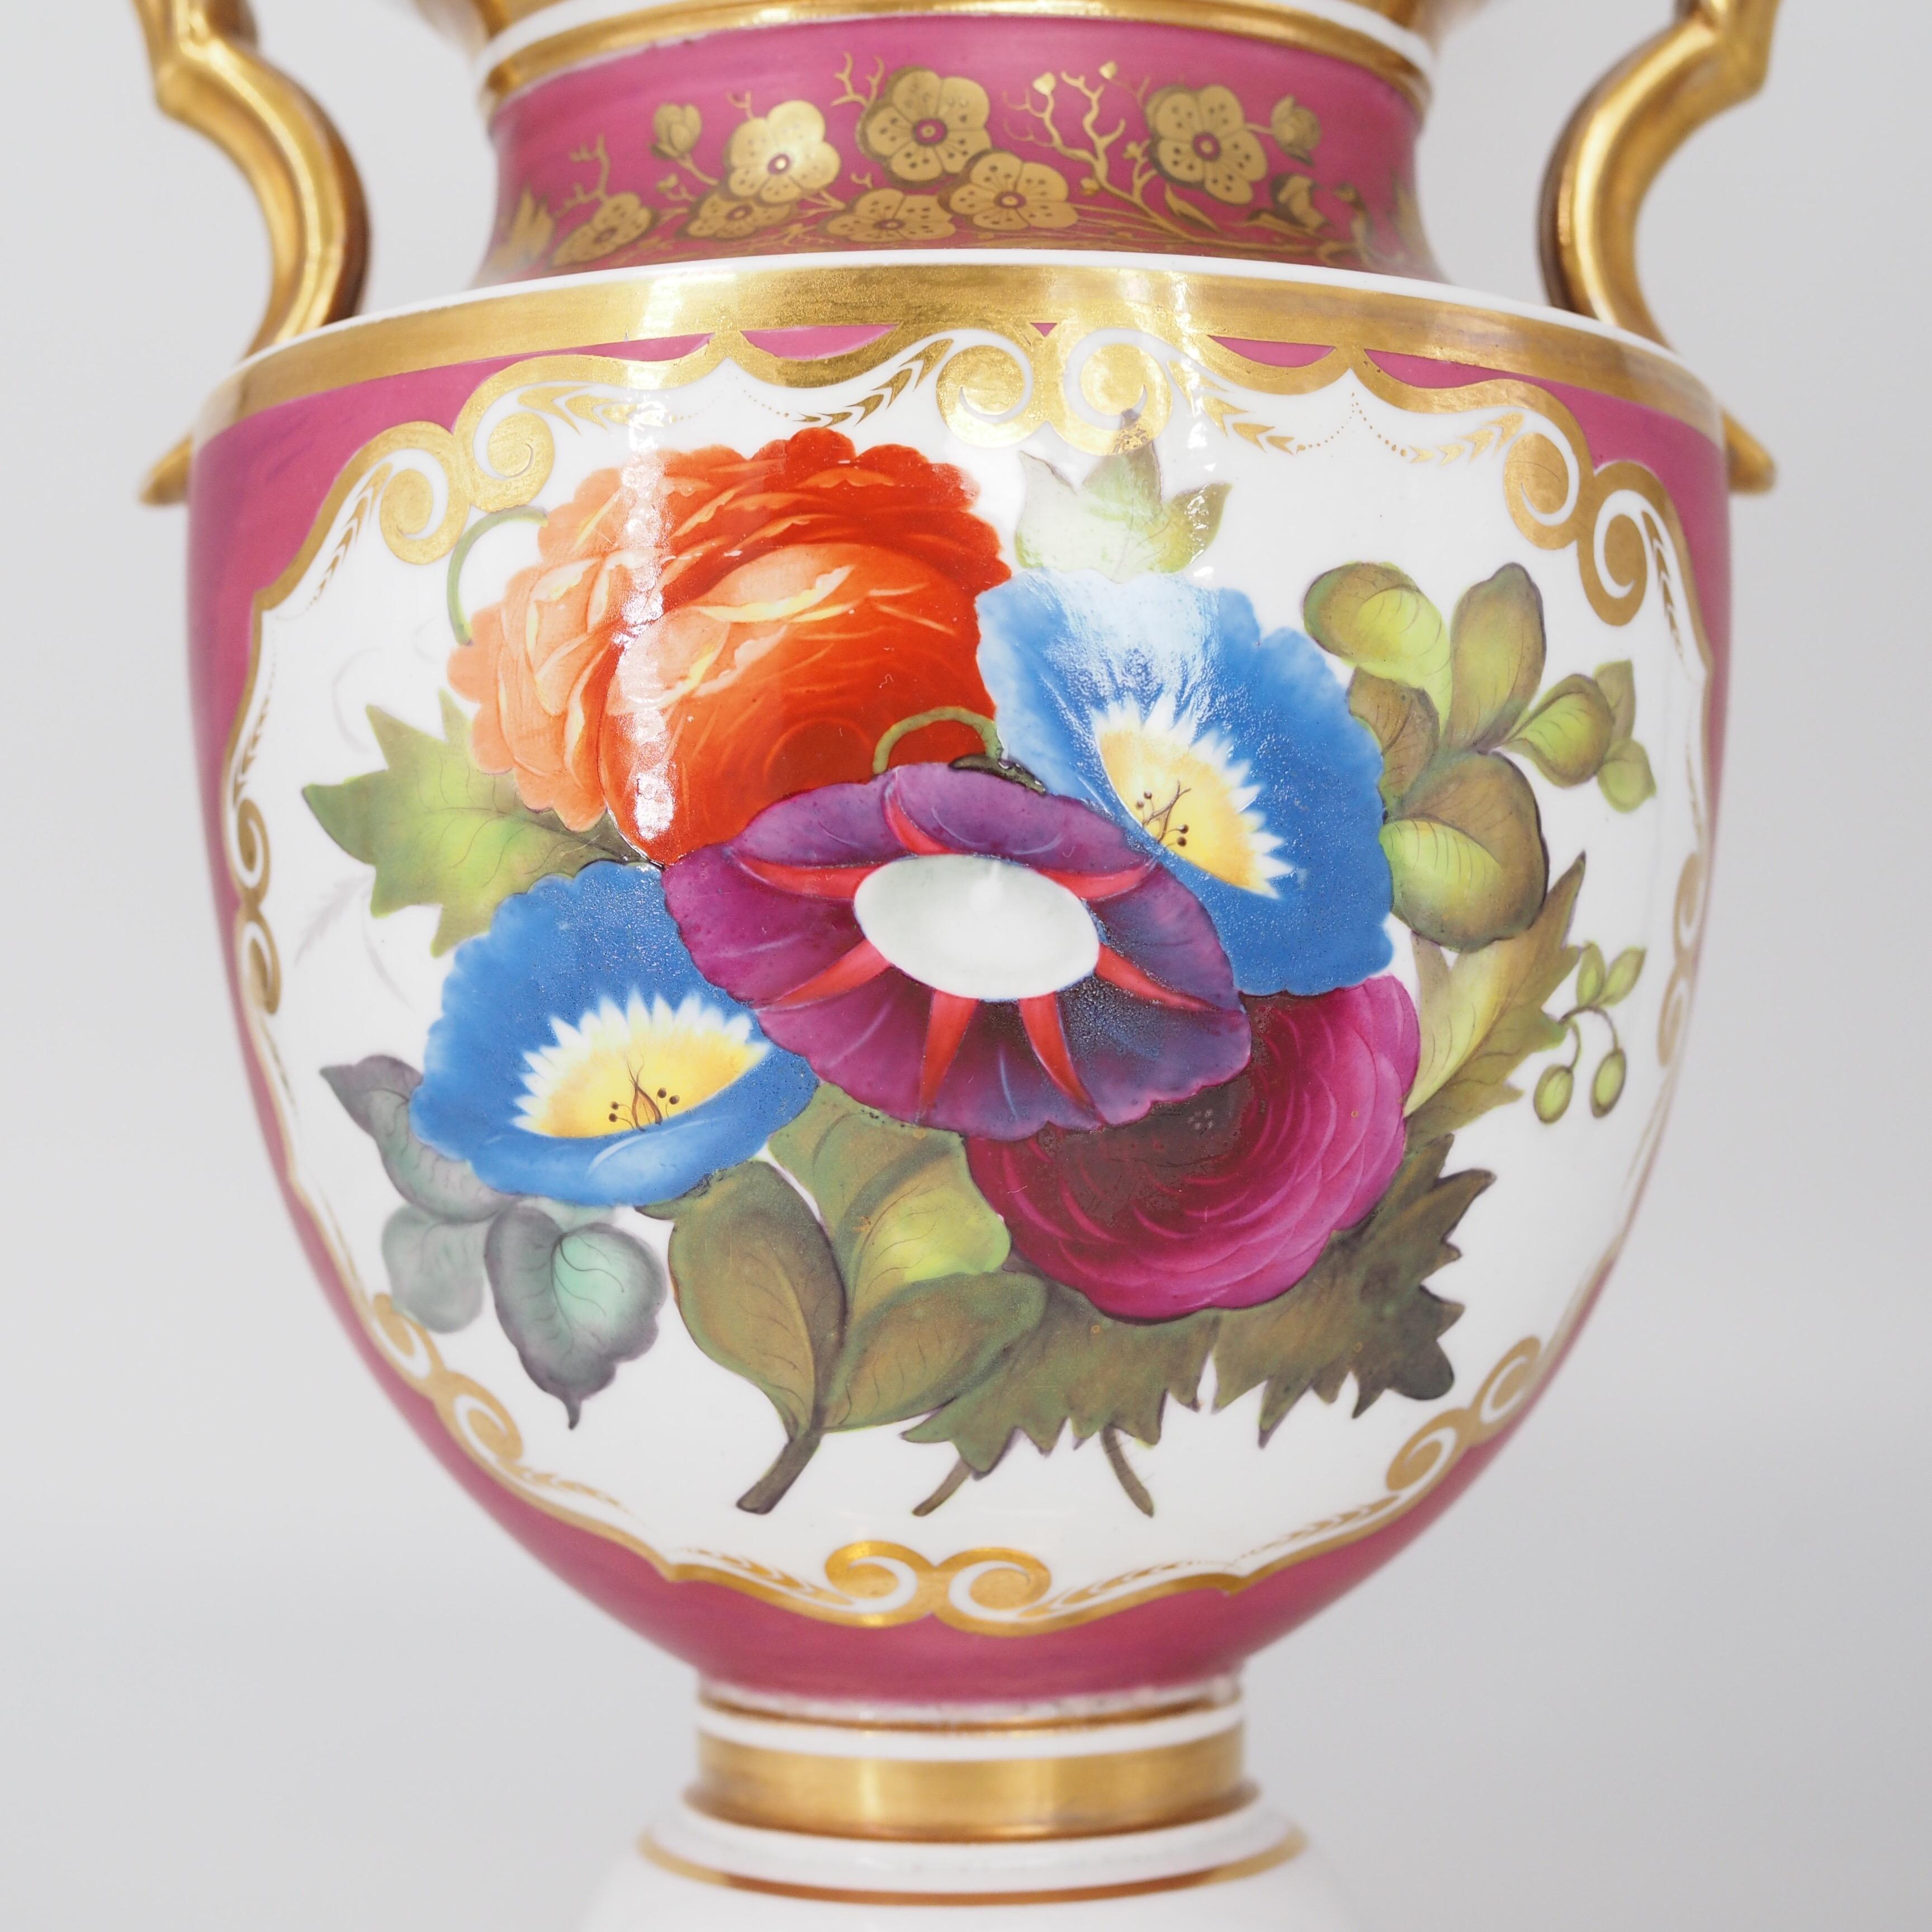 English Porcelain Classical Vase with Flower Panels, Claret Ground, c. 1825 In Good Condition For Sale In Geelong, Victoria